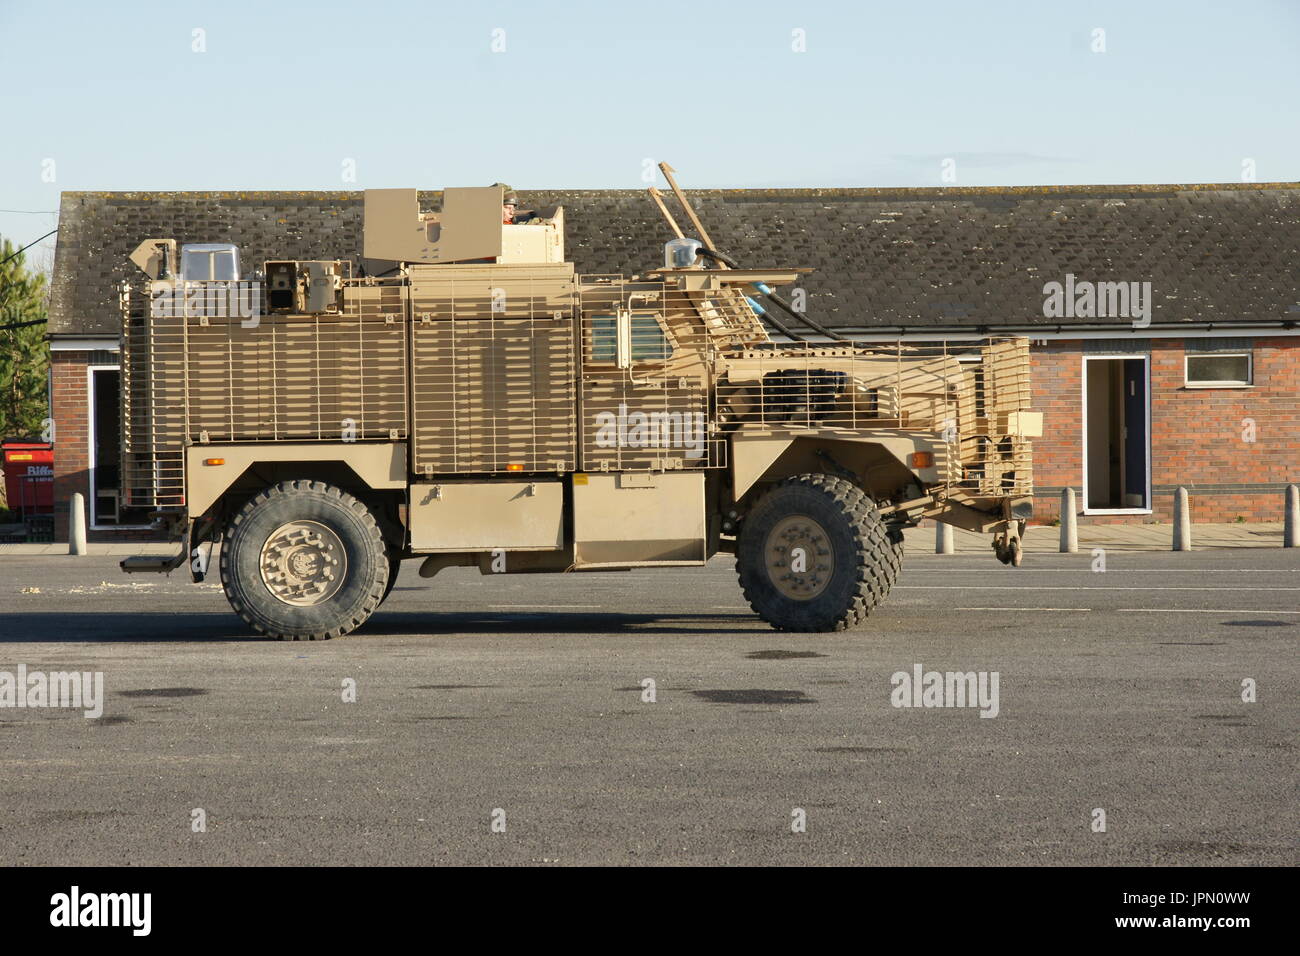 Mastiff, Ridgback armoured personnel carrier Stock Photo